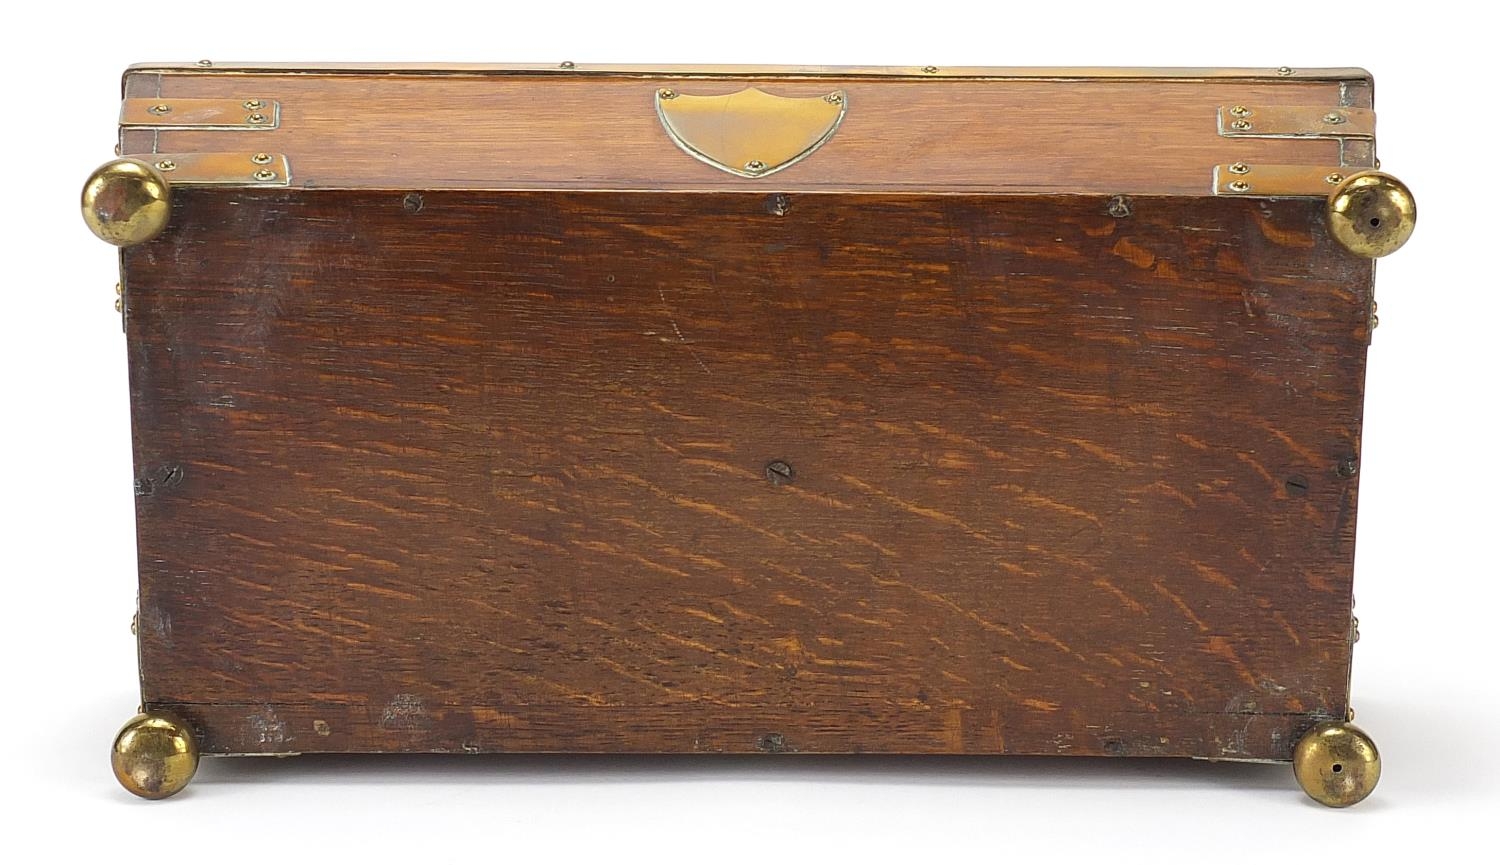 Early 19th century oak cutlery box with brass mounts, 37cm wide - Image 3 of 3